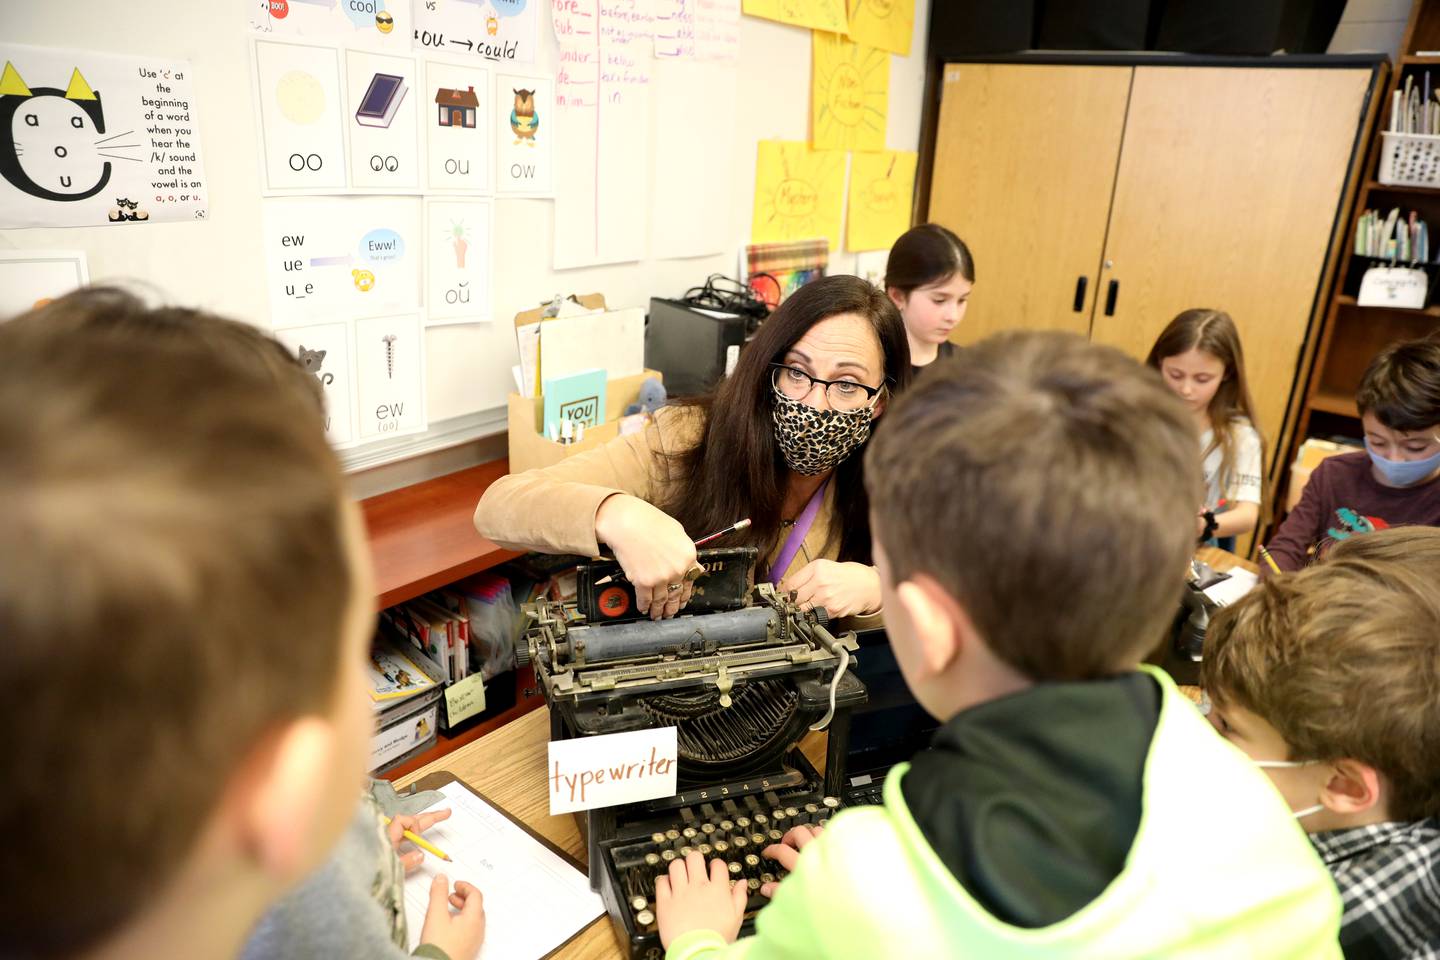 Munhall Elementary School second grade teacher Amy Fronk and her students examine historic relics such as a typewriter and rotary telephone and compared them to the present-day equivalent of a laptop computer and cellular phone. Fronk grew up in St. Charles and attended Munhall as a student.